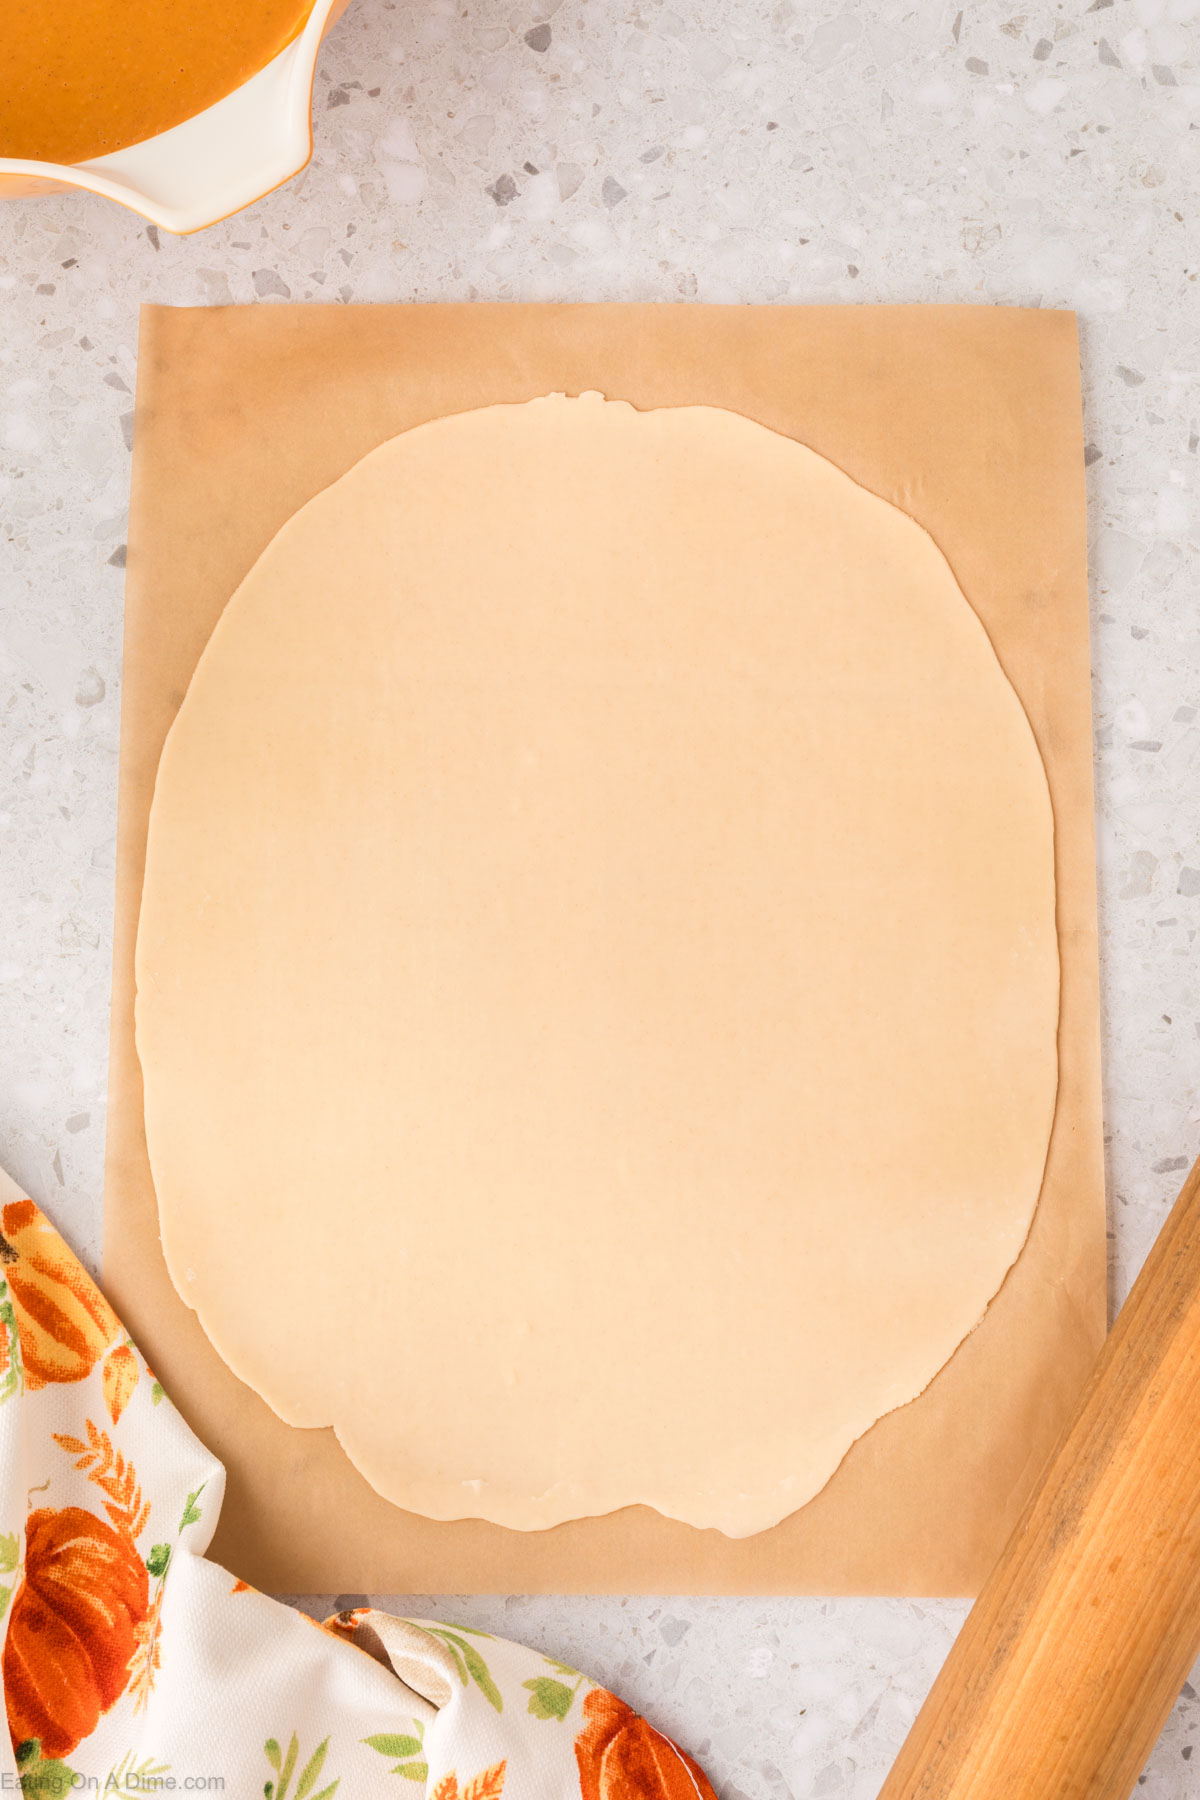 Rolling the pie crust dough on parchment paper with a rolling pin